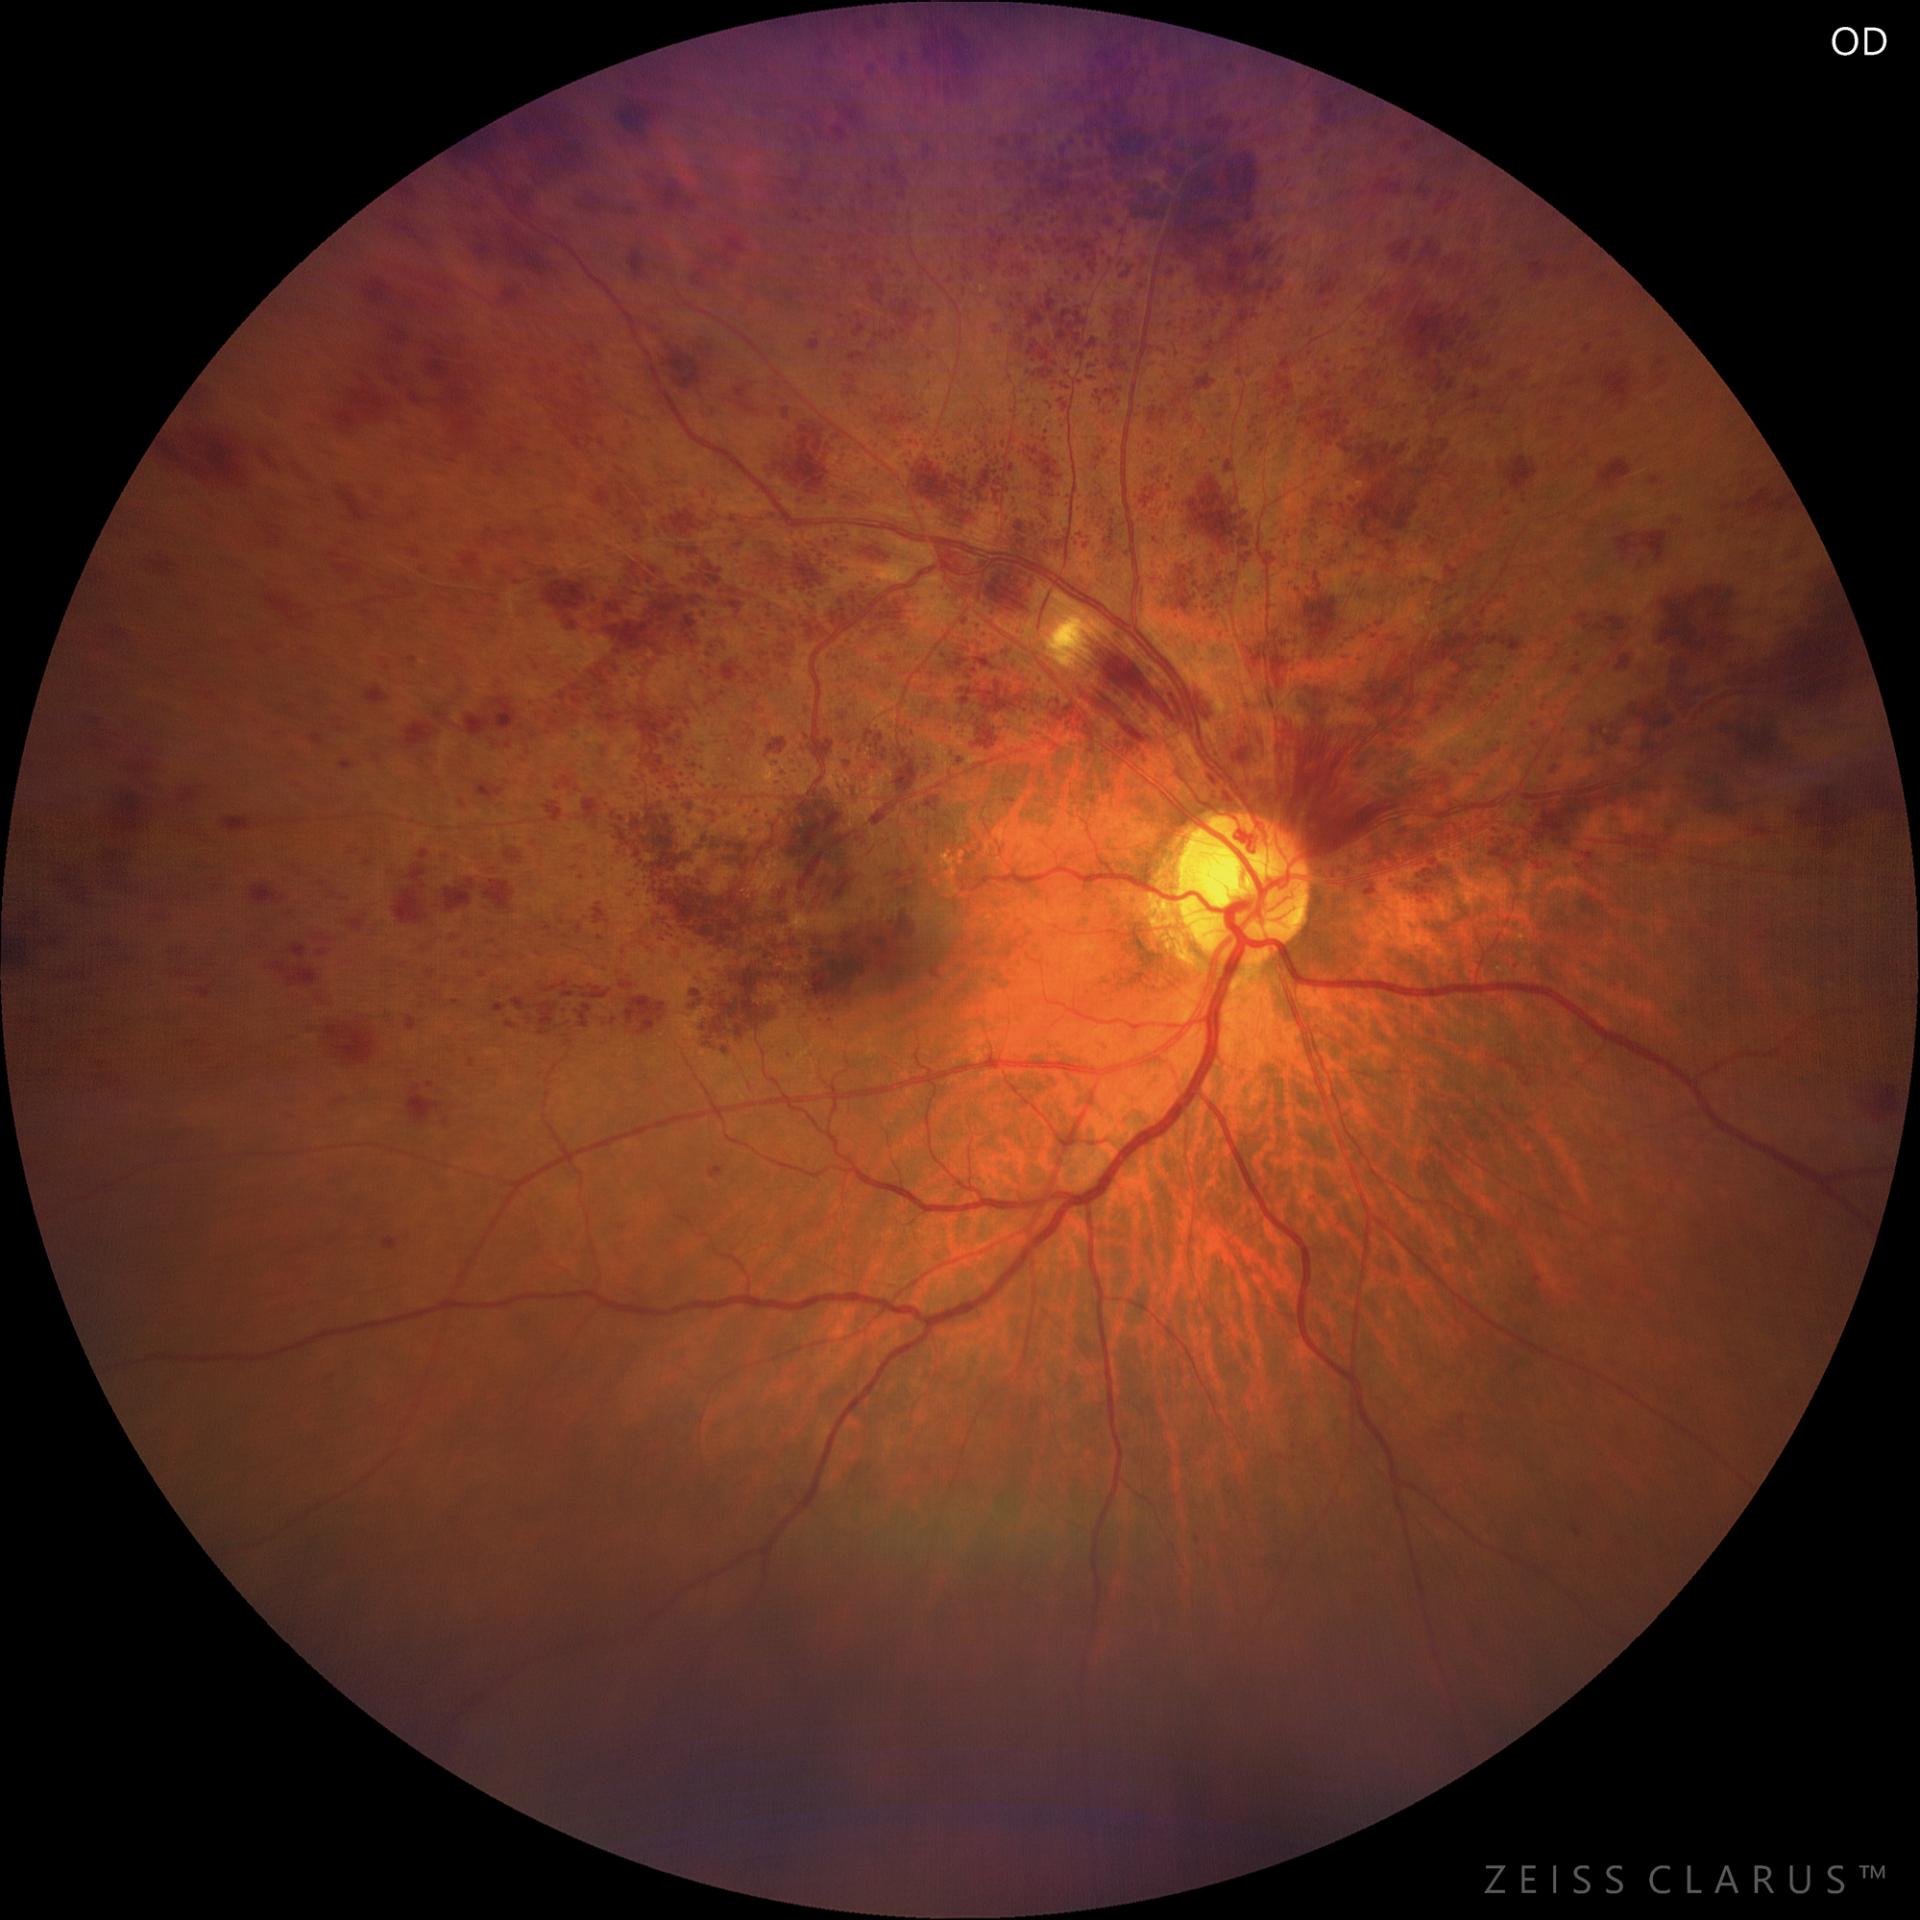 WF 133° image. Retinal hemorrhages seen throughout the upper hemisection.